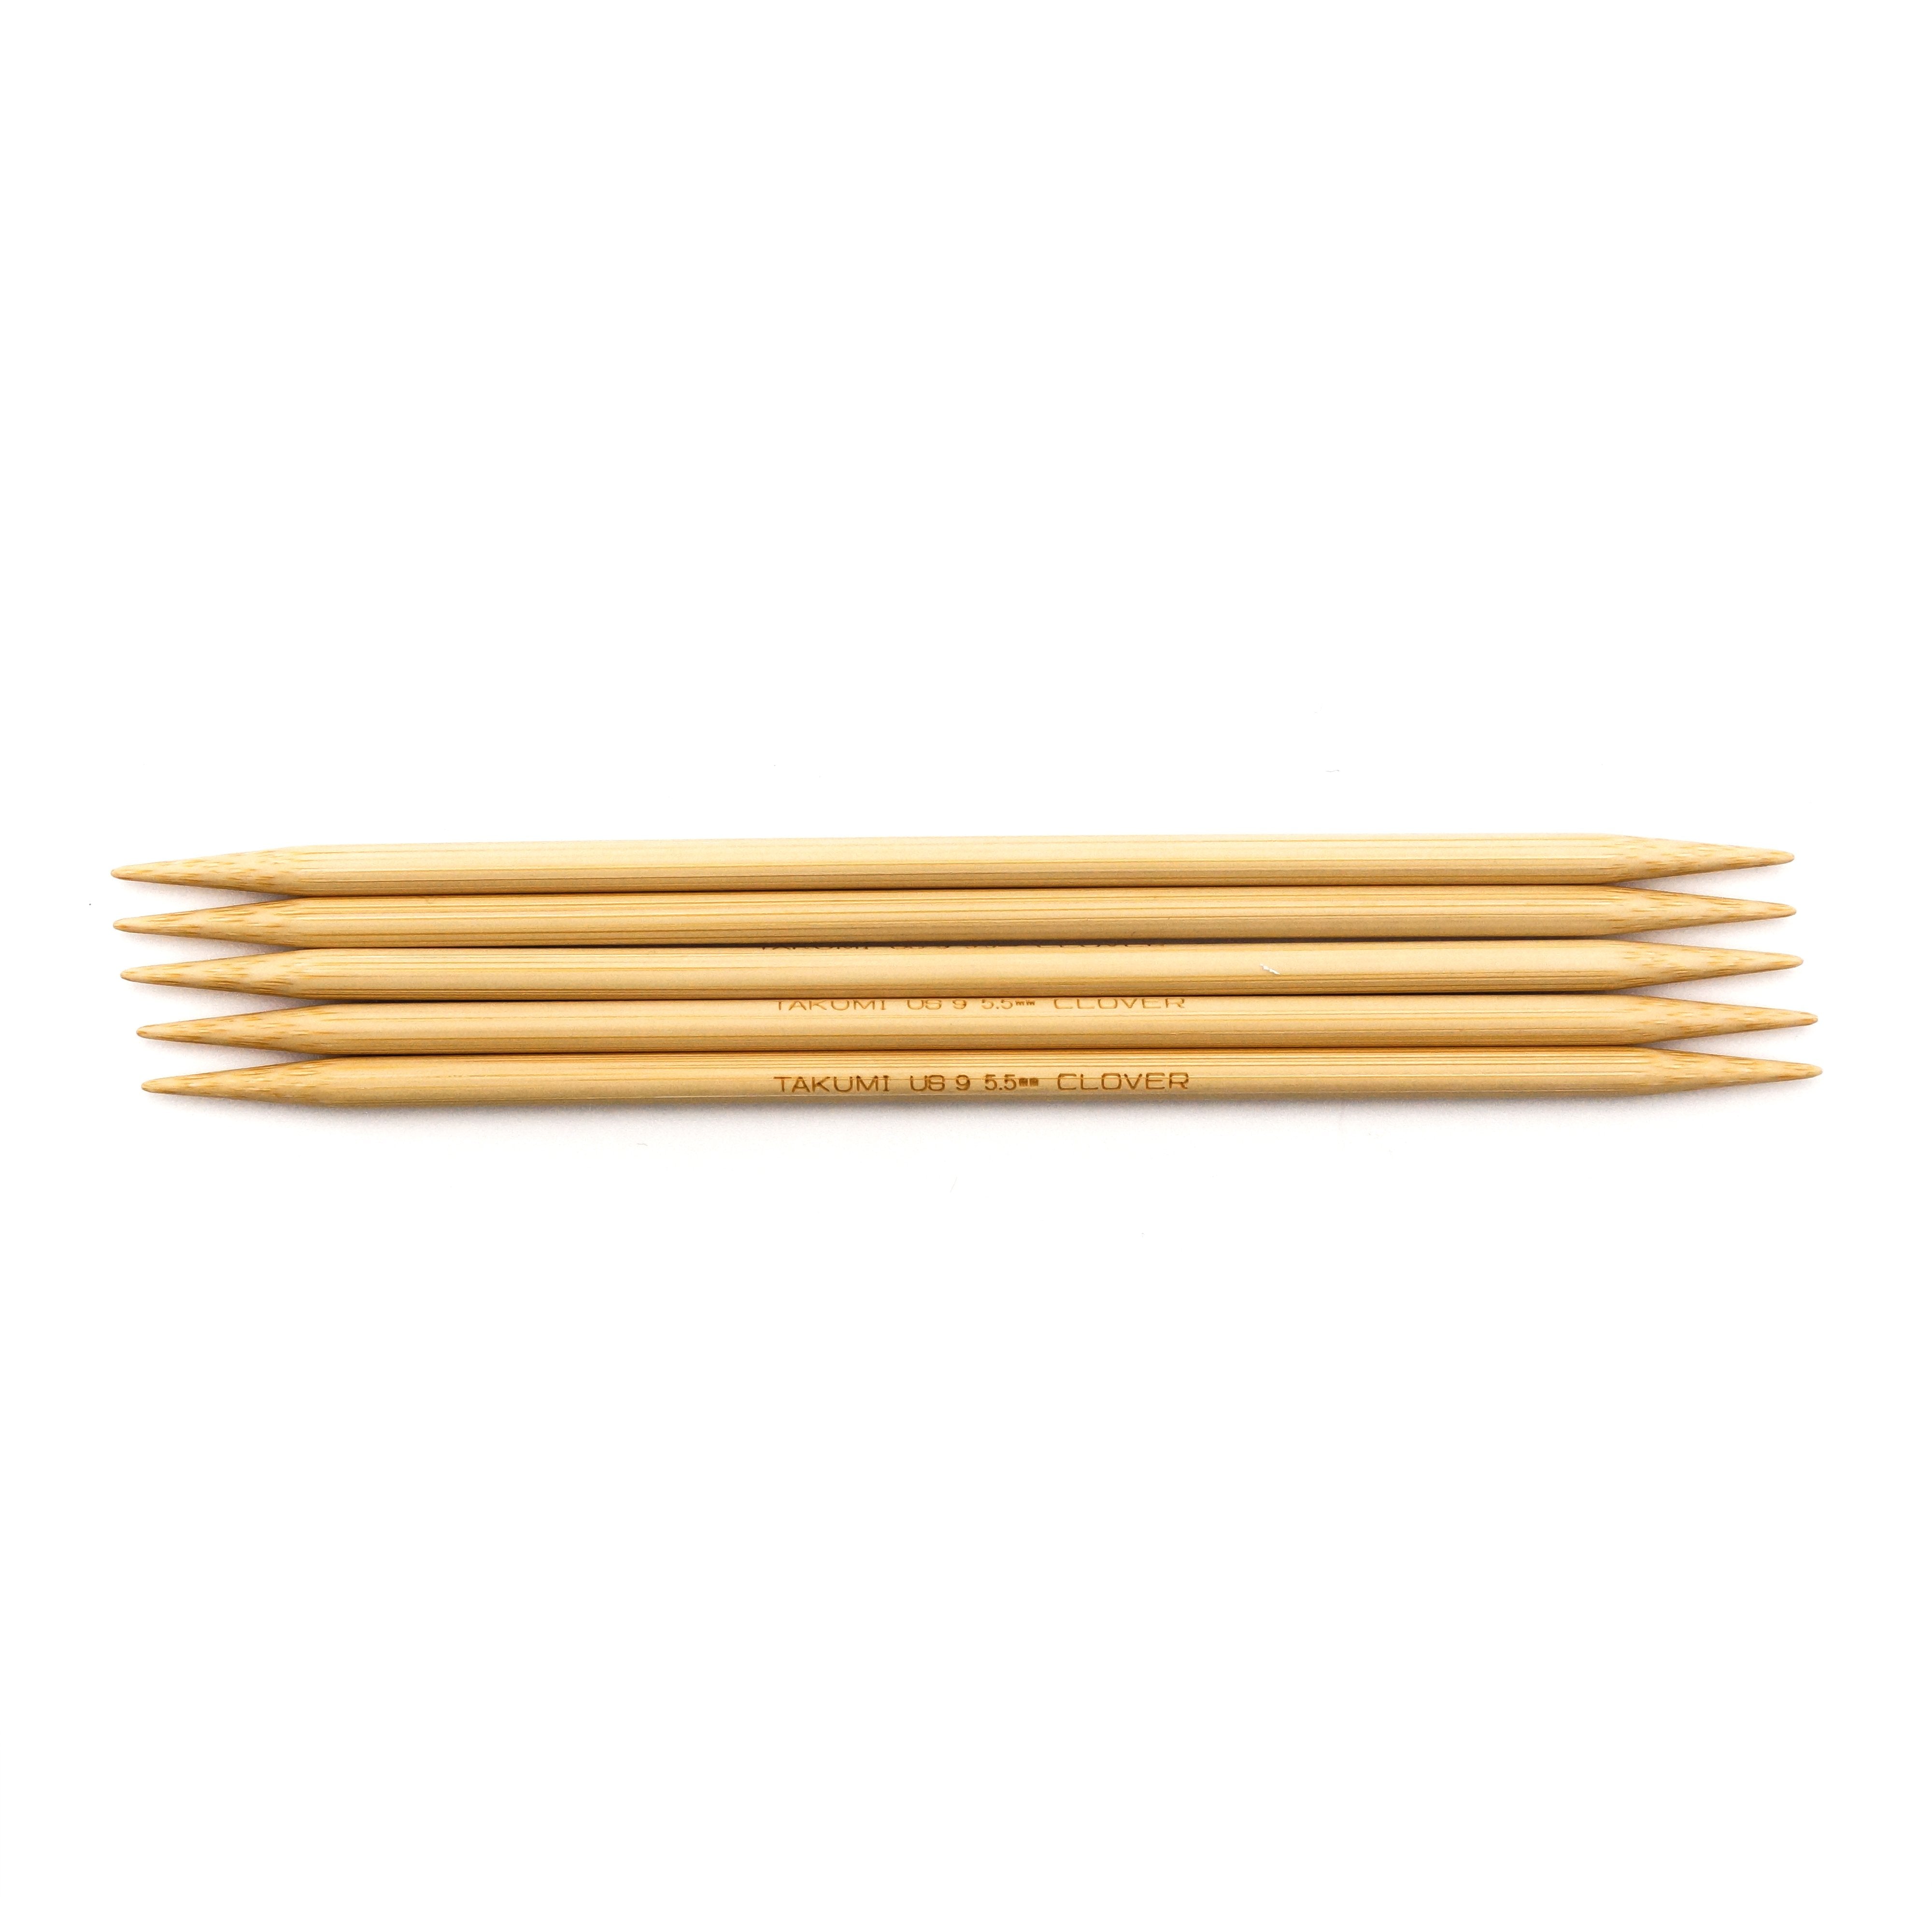 DOUBLE POINTED KNITTING NEEDLE SET – 7.9” LONG - BAMBOO - INCLUDES